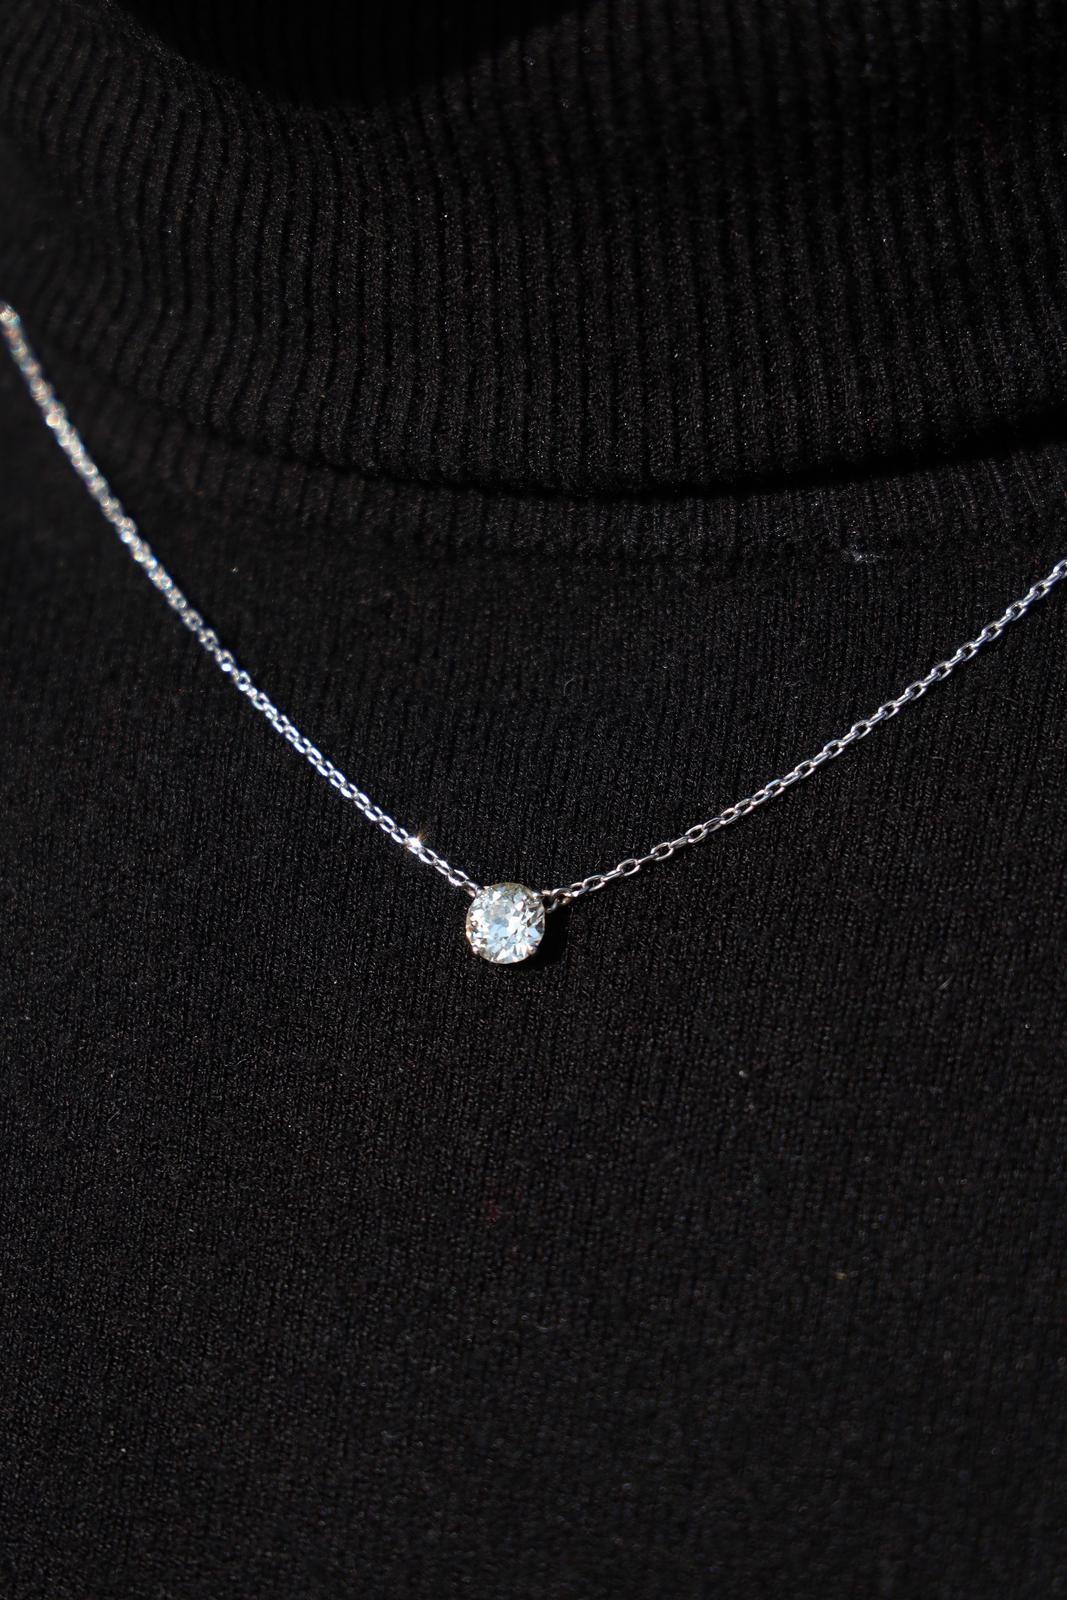 Necklace in white gold 750 thousandths (18 carats). mesh forÃ§at. set with a diamond old cut. about 0.83 ct. dimensions of the pendant: 0.70 x 0.70 cm. turn of neck: 45 cm. total weight: 3.62 g. hallmark Eagle head. Excellent condition